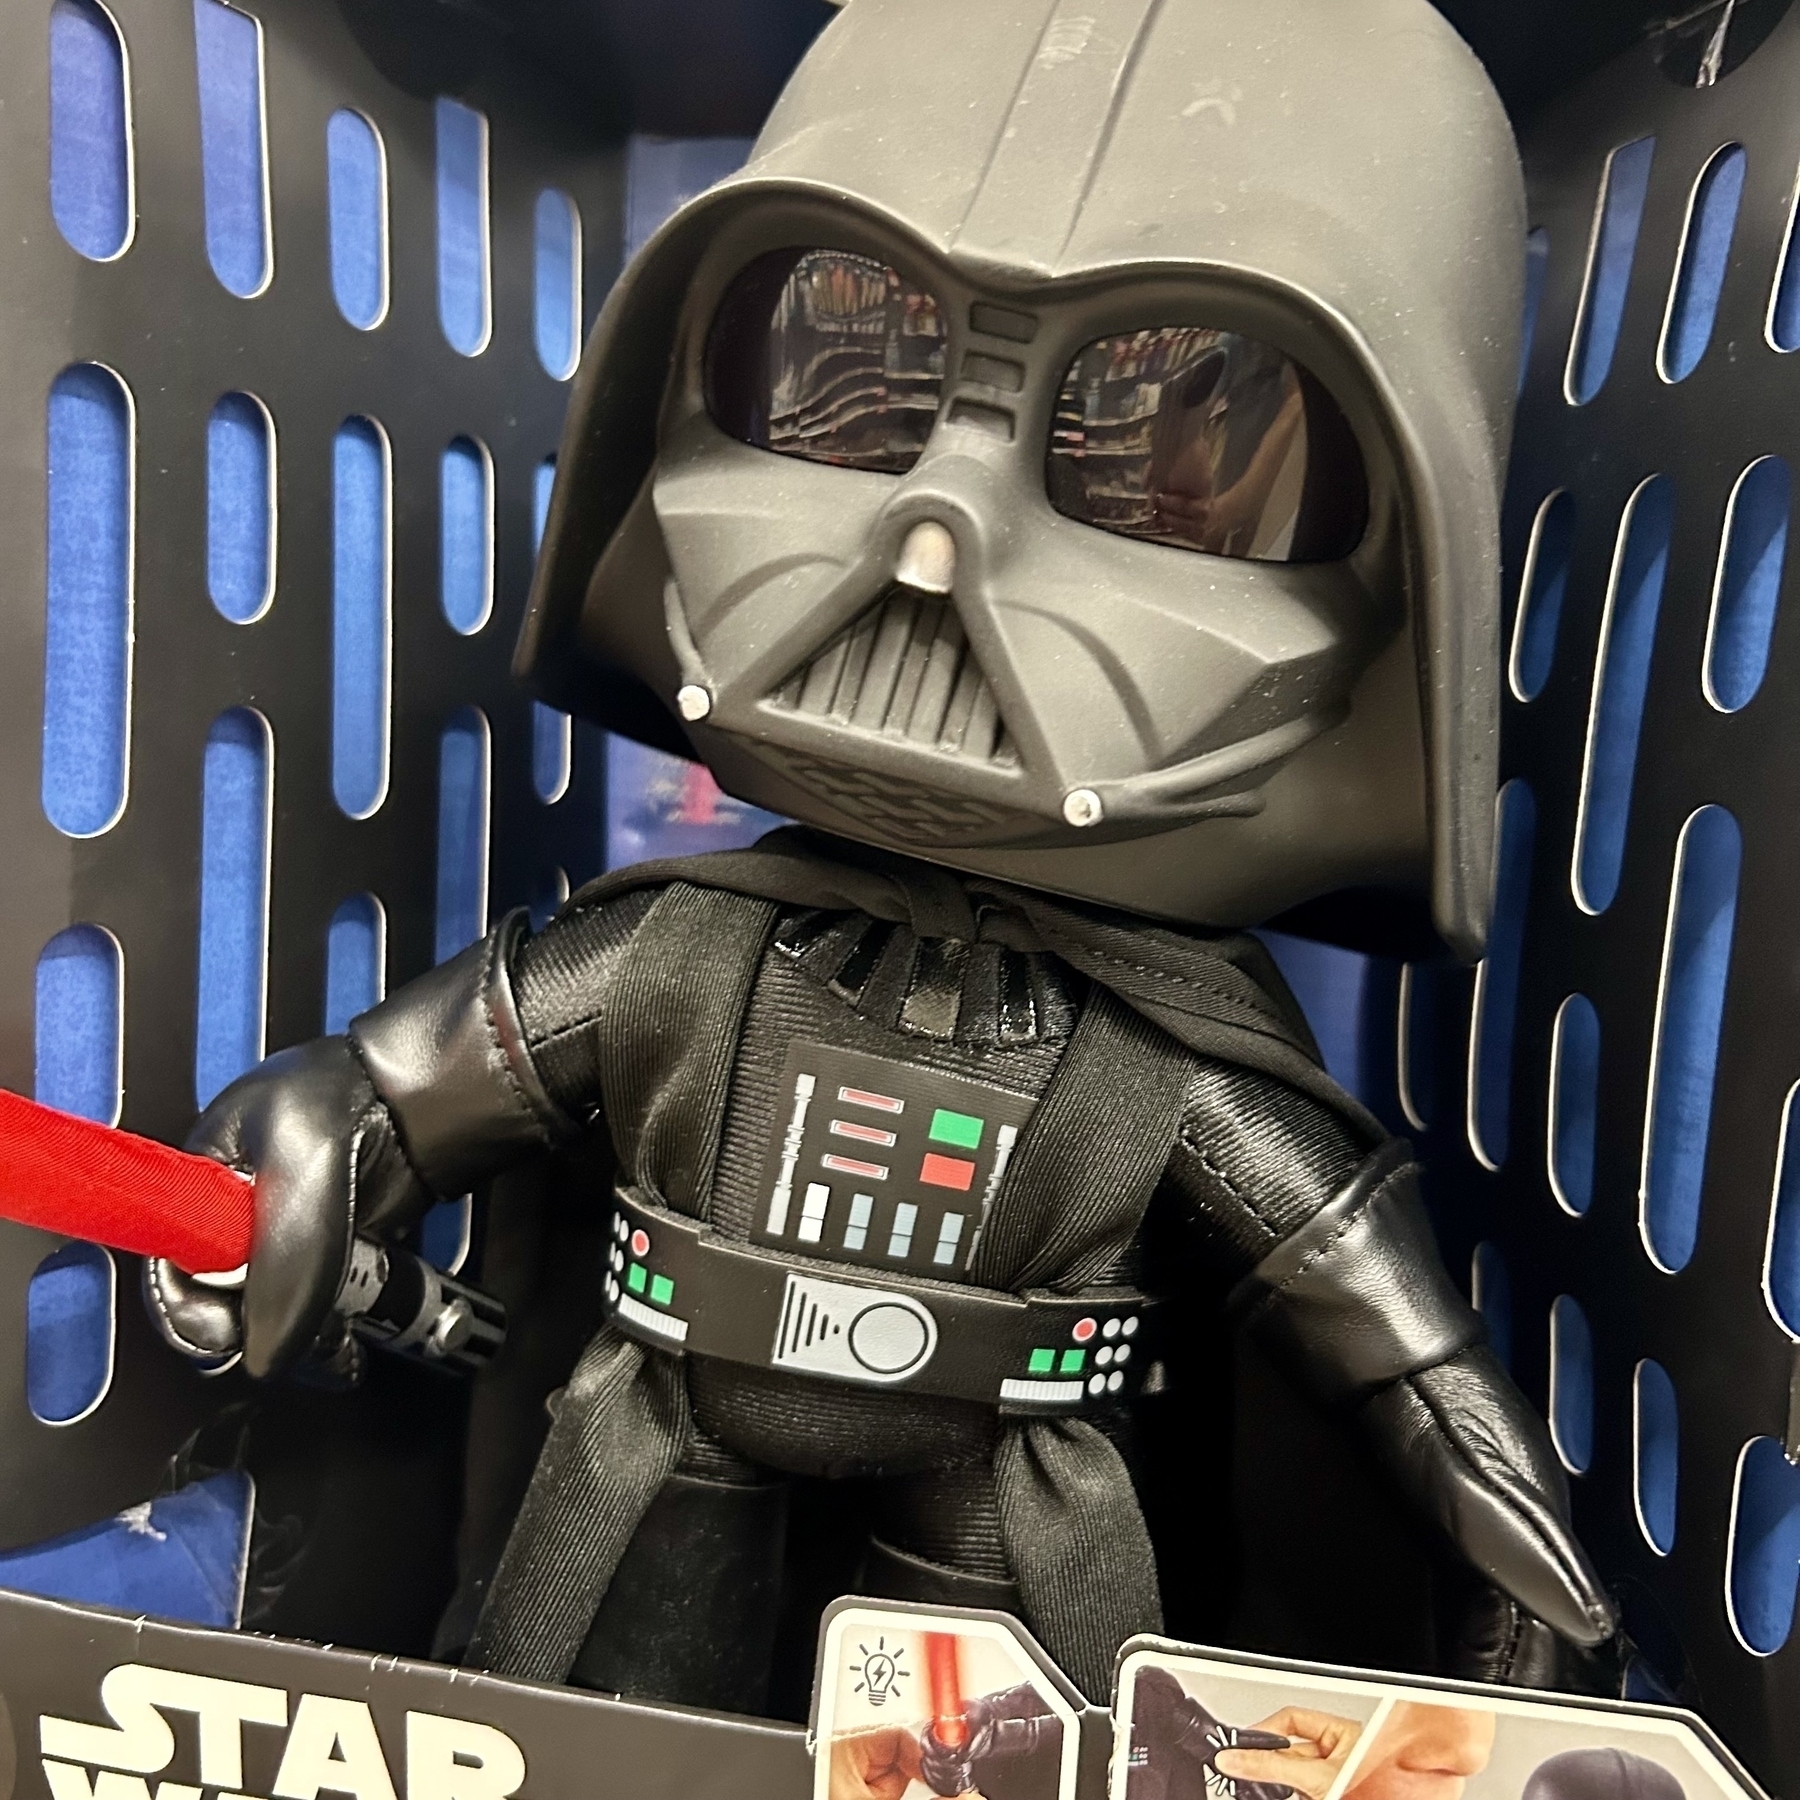 A small toy of Darth Vader but styled with an extra big head like a baby.